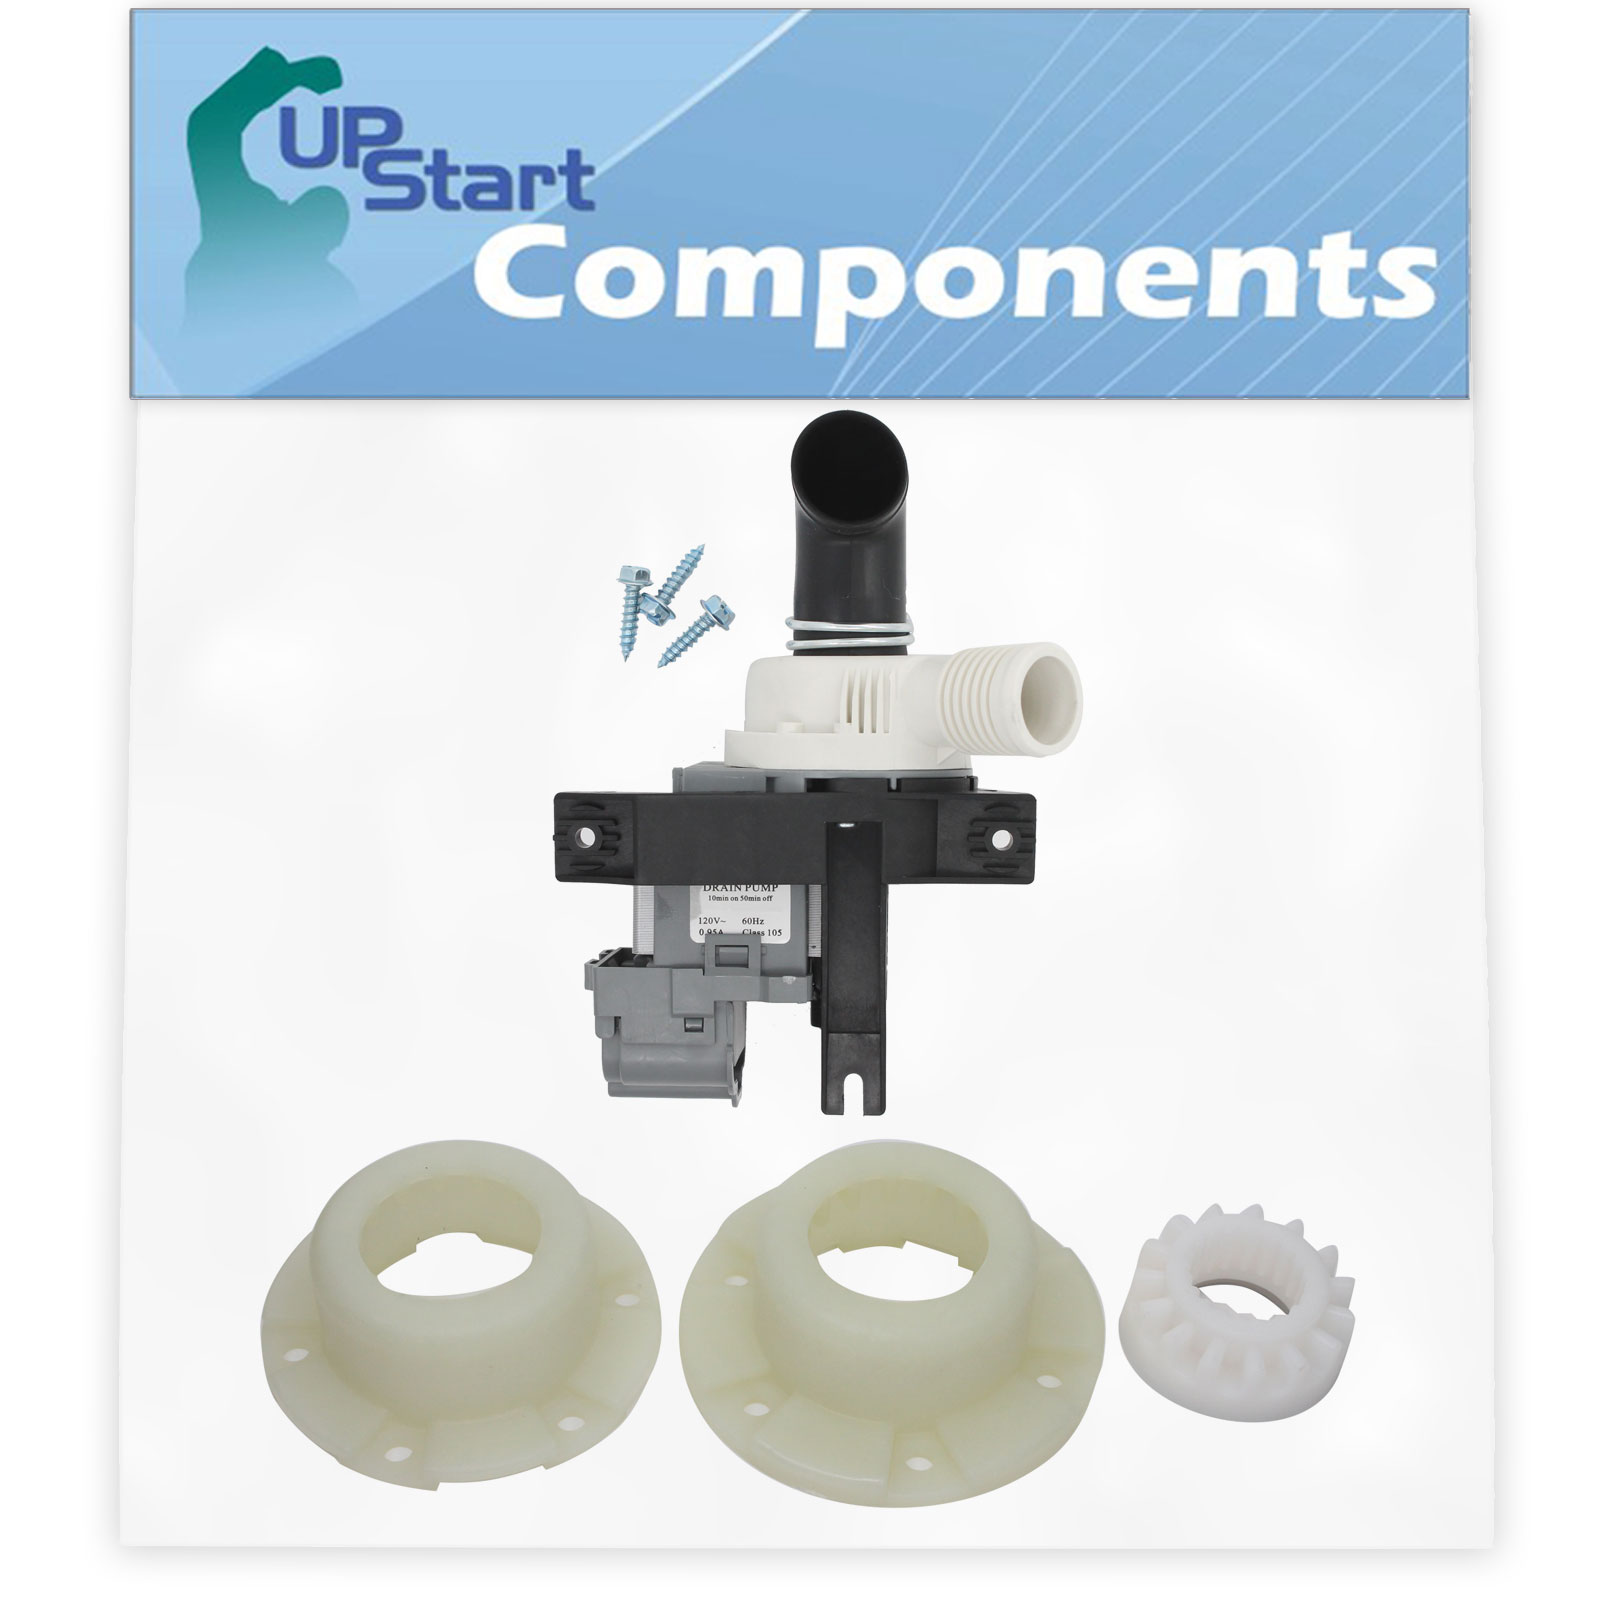 W10536347 Washer Drain Pump & 280145 Hub Kit Replacement for Whirlpool WTW6700TW0 Washing Machine - Compatible with W10217134 Water Pump & W10820039 Basket Hub Kit - UpStart Components Brand - image 1 of 4